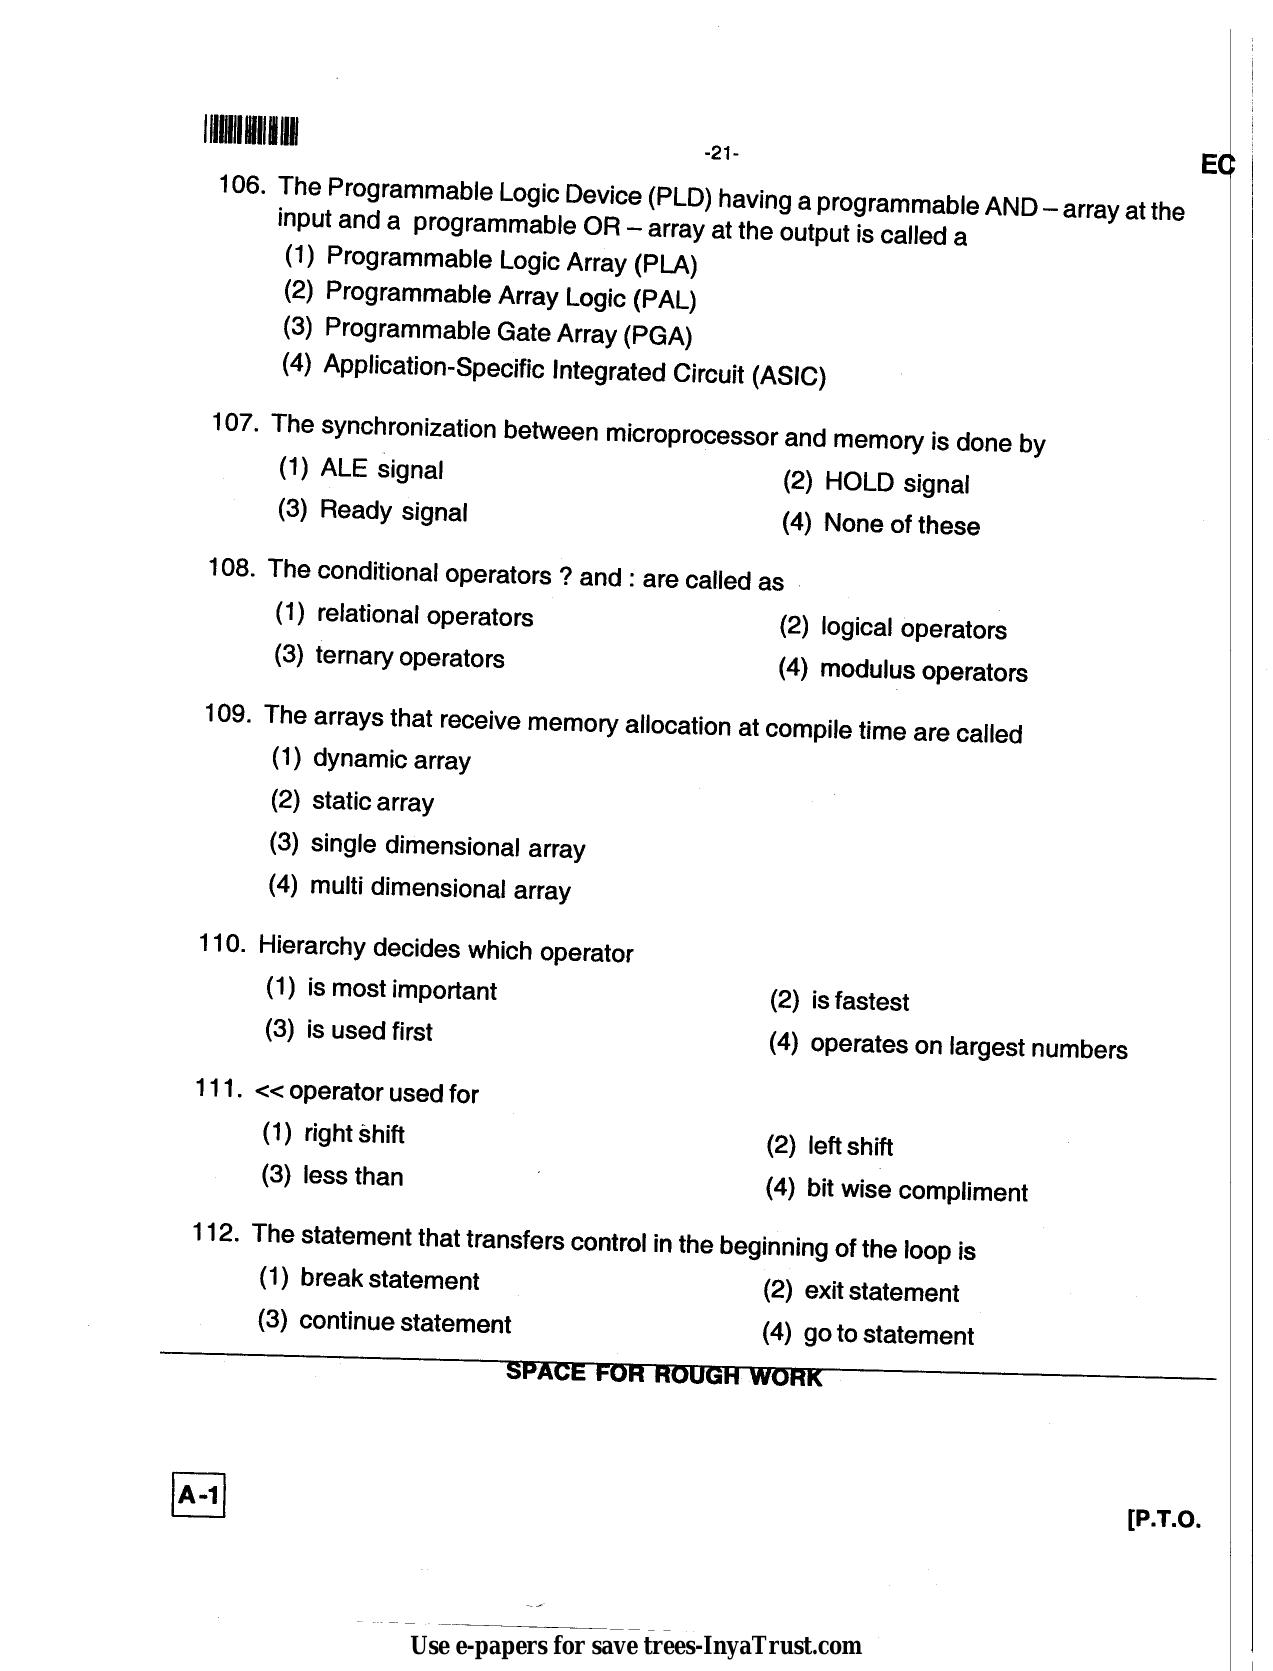 Karnataka Diploma CET- 2013 Electronics and Communication Engineering Question Paper - Page 21